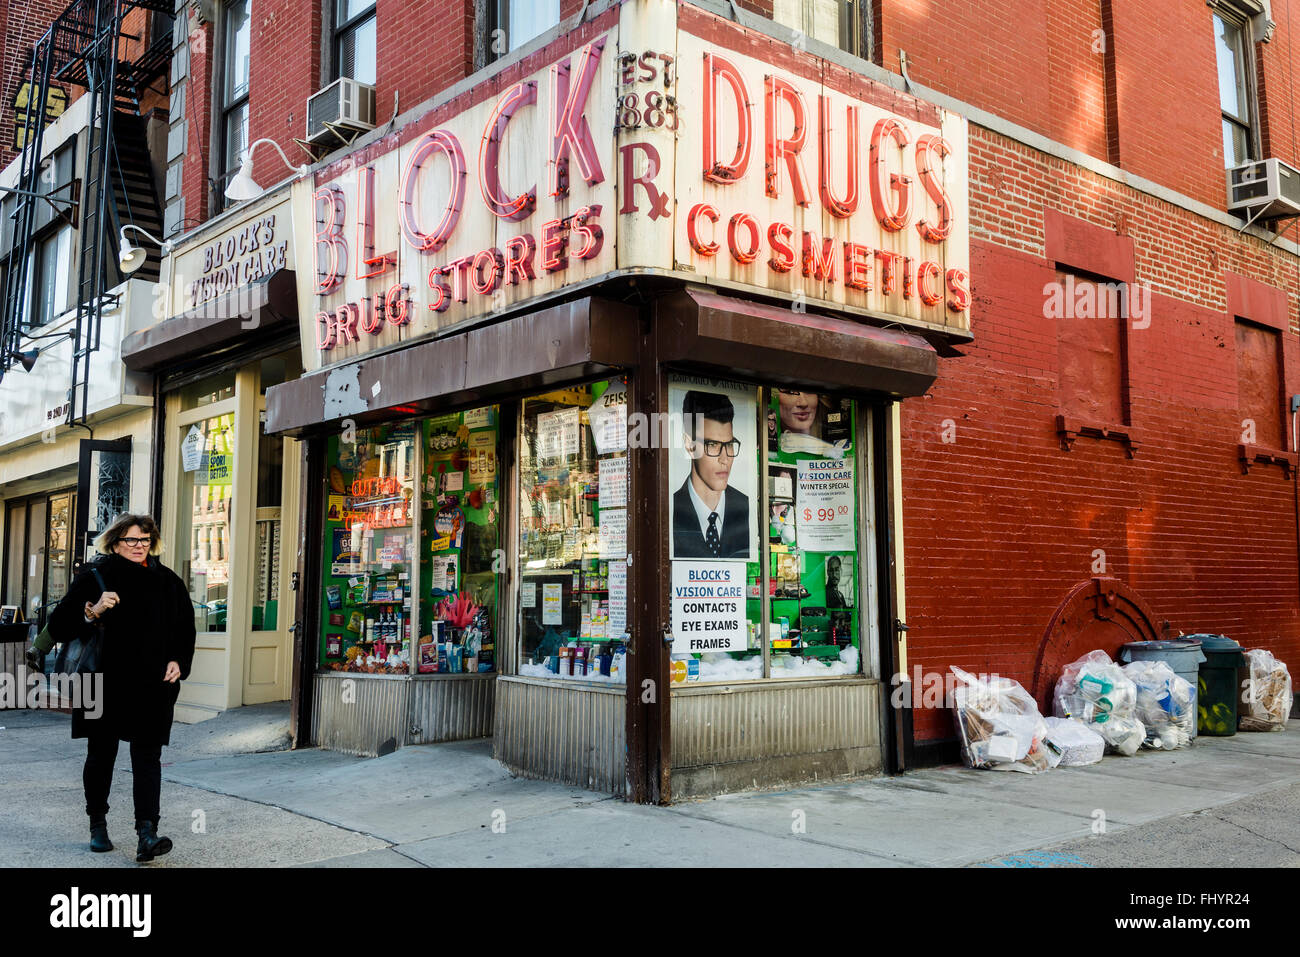 New York, NY 26 February 2016 - Block Drug Store in the East Village Stock Photo